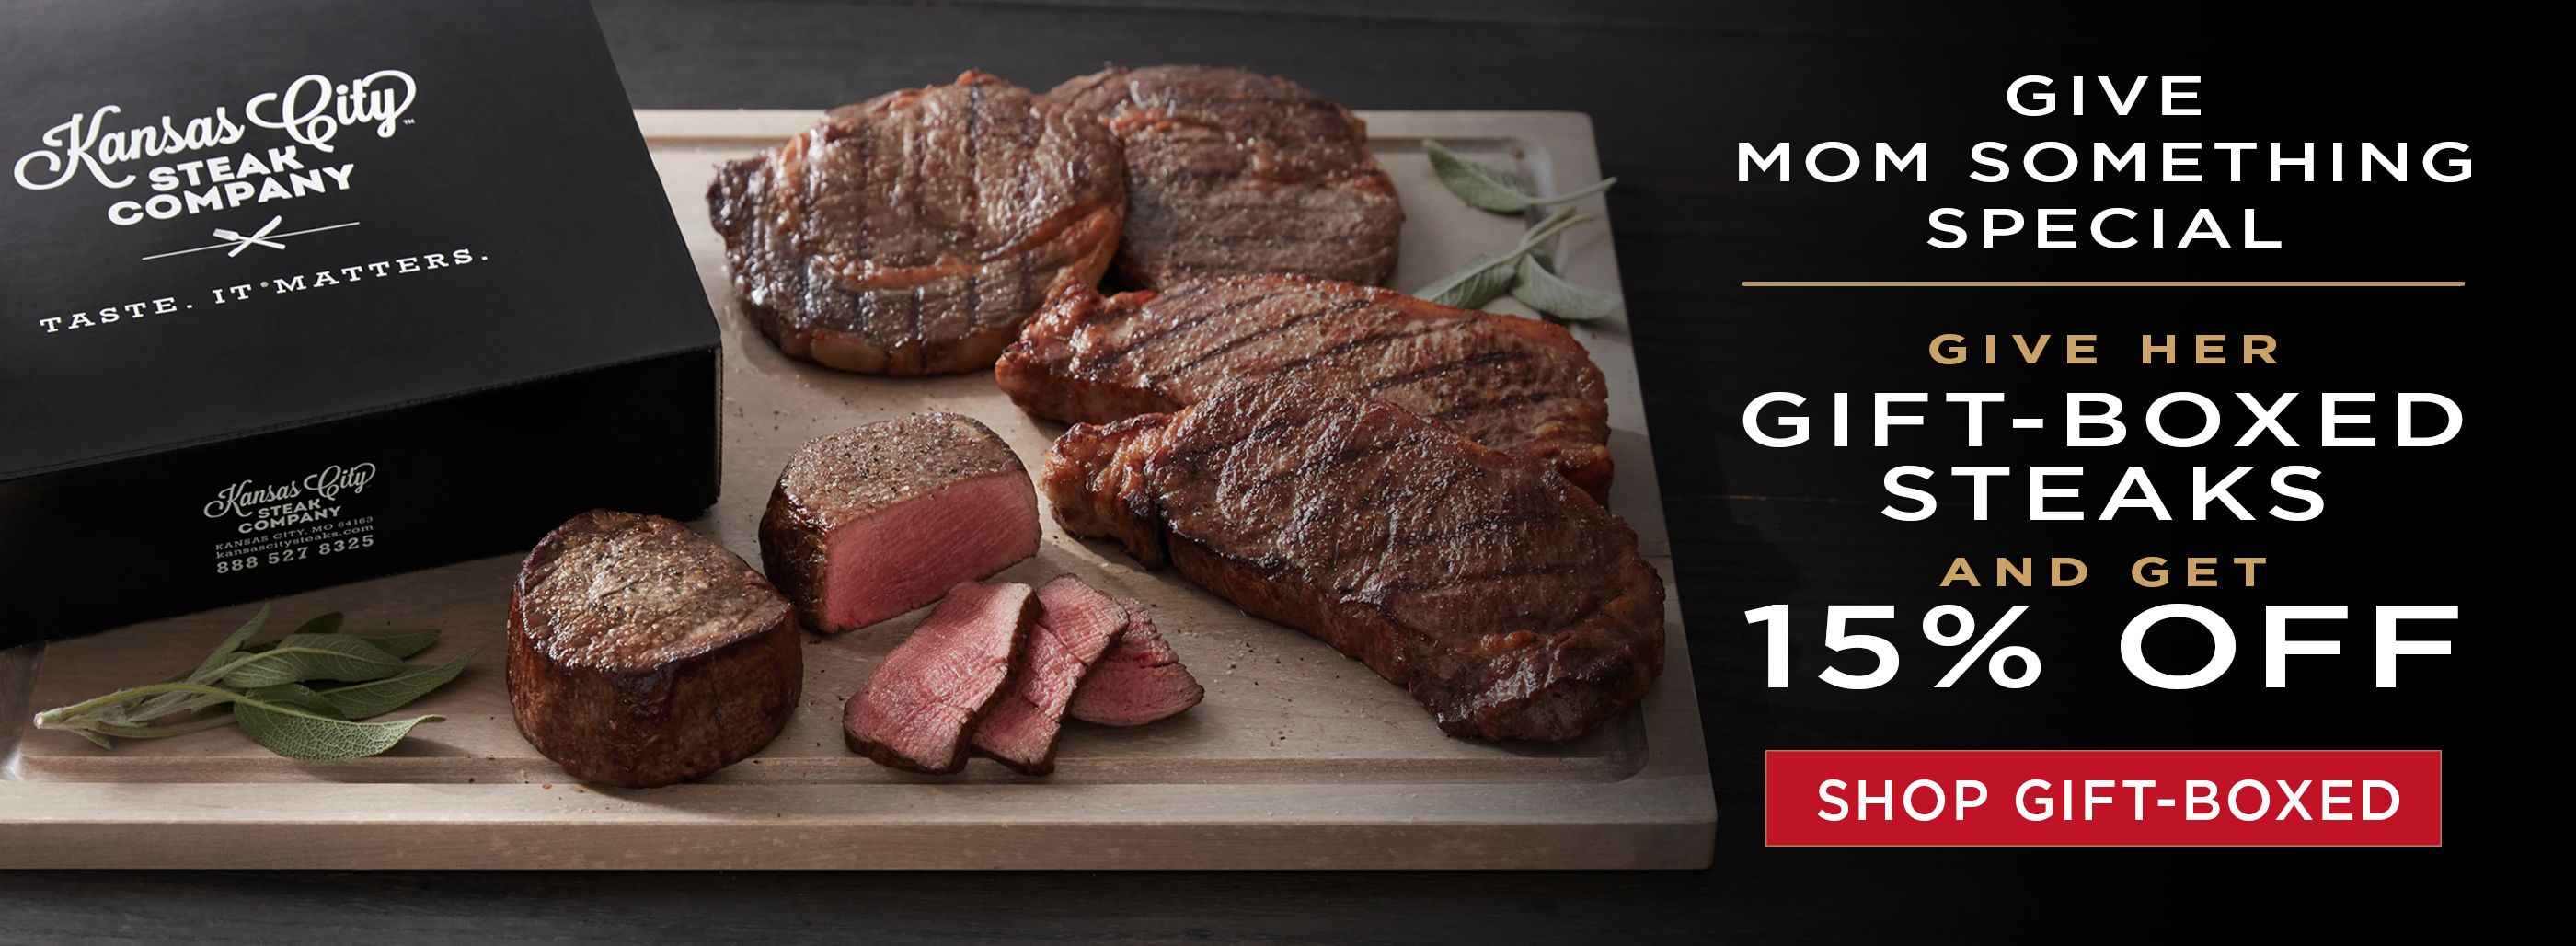 Give Mom something special. Give her gift-boxed steaks and get 15% off.